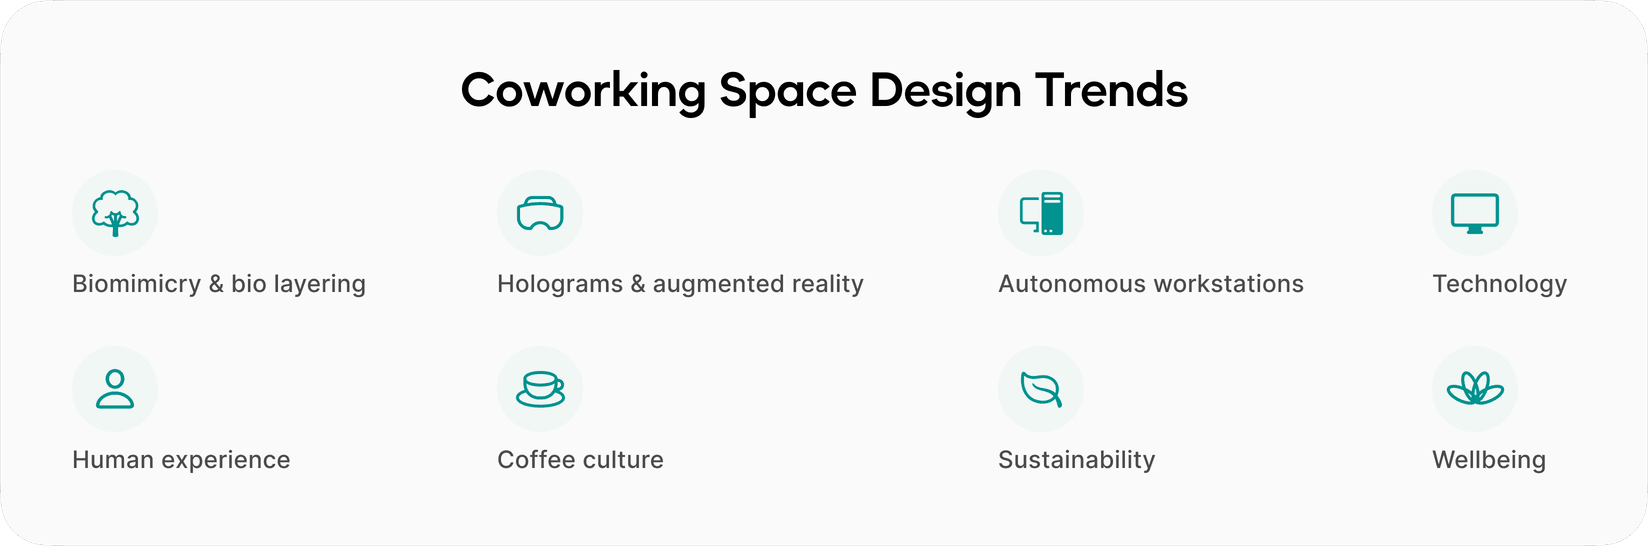 Coworking space design trends